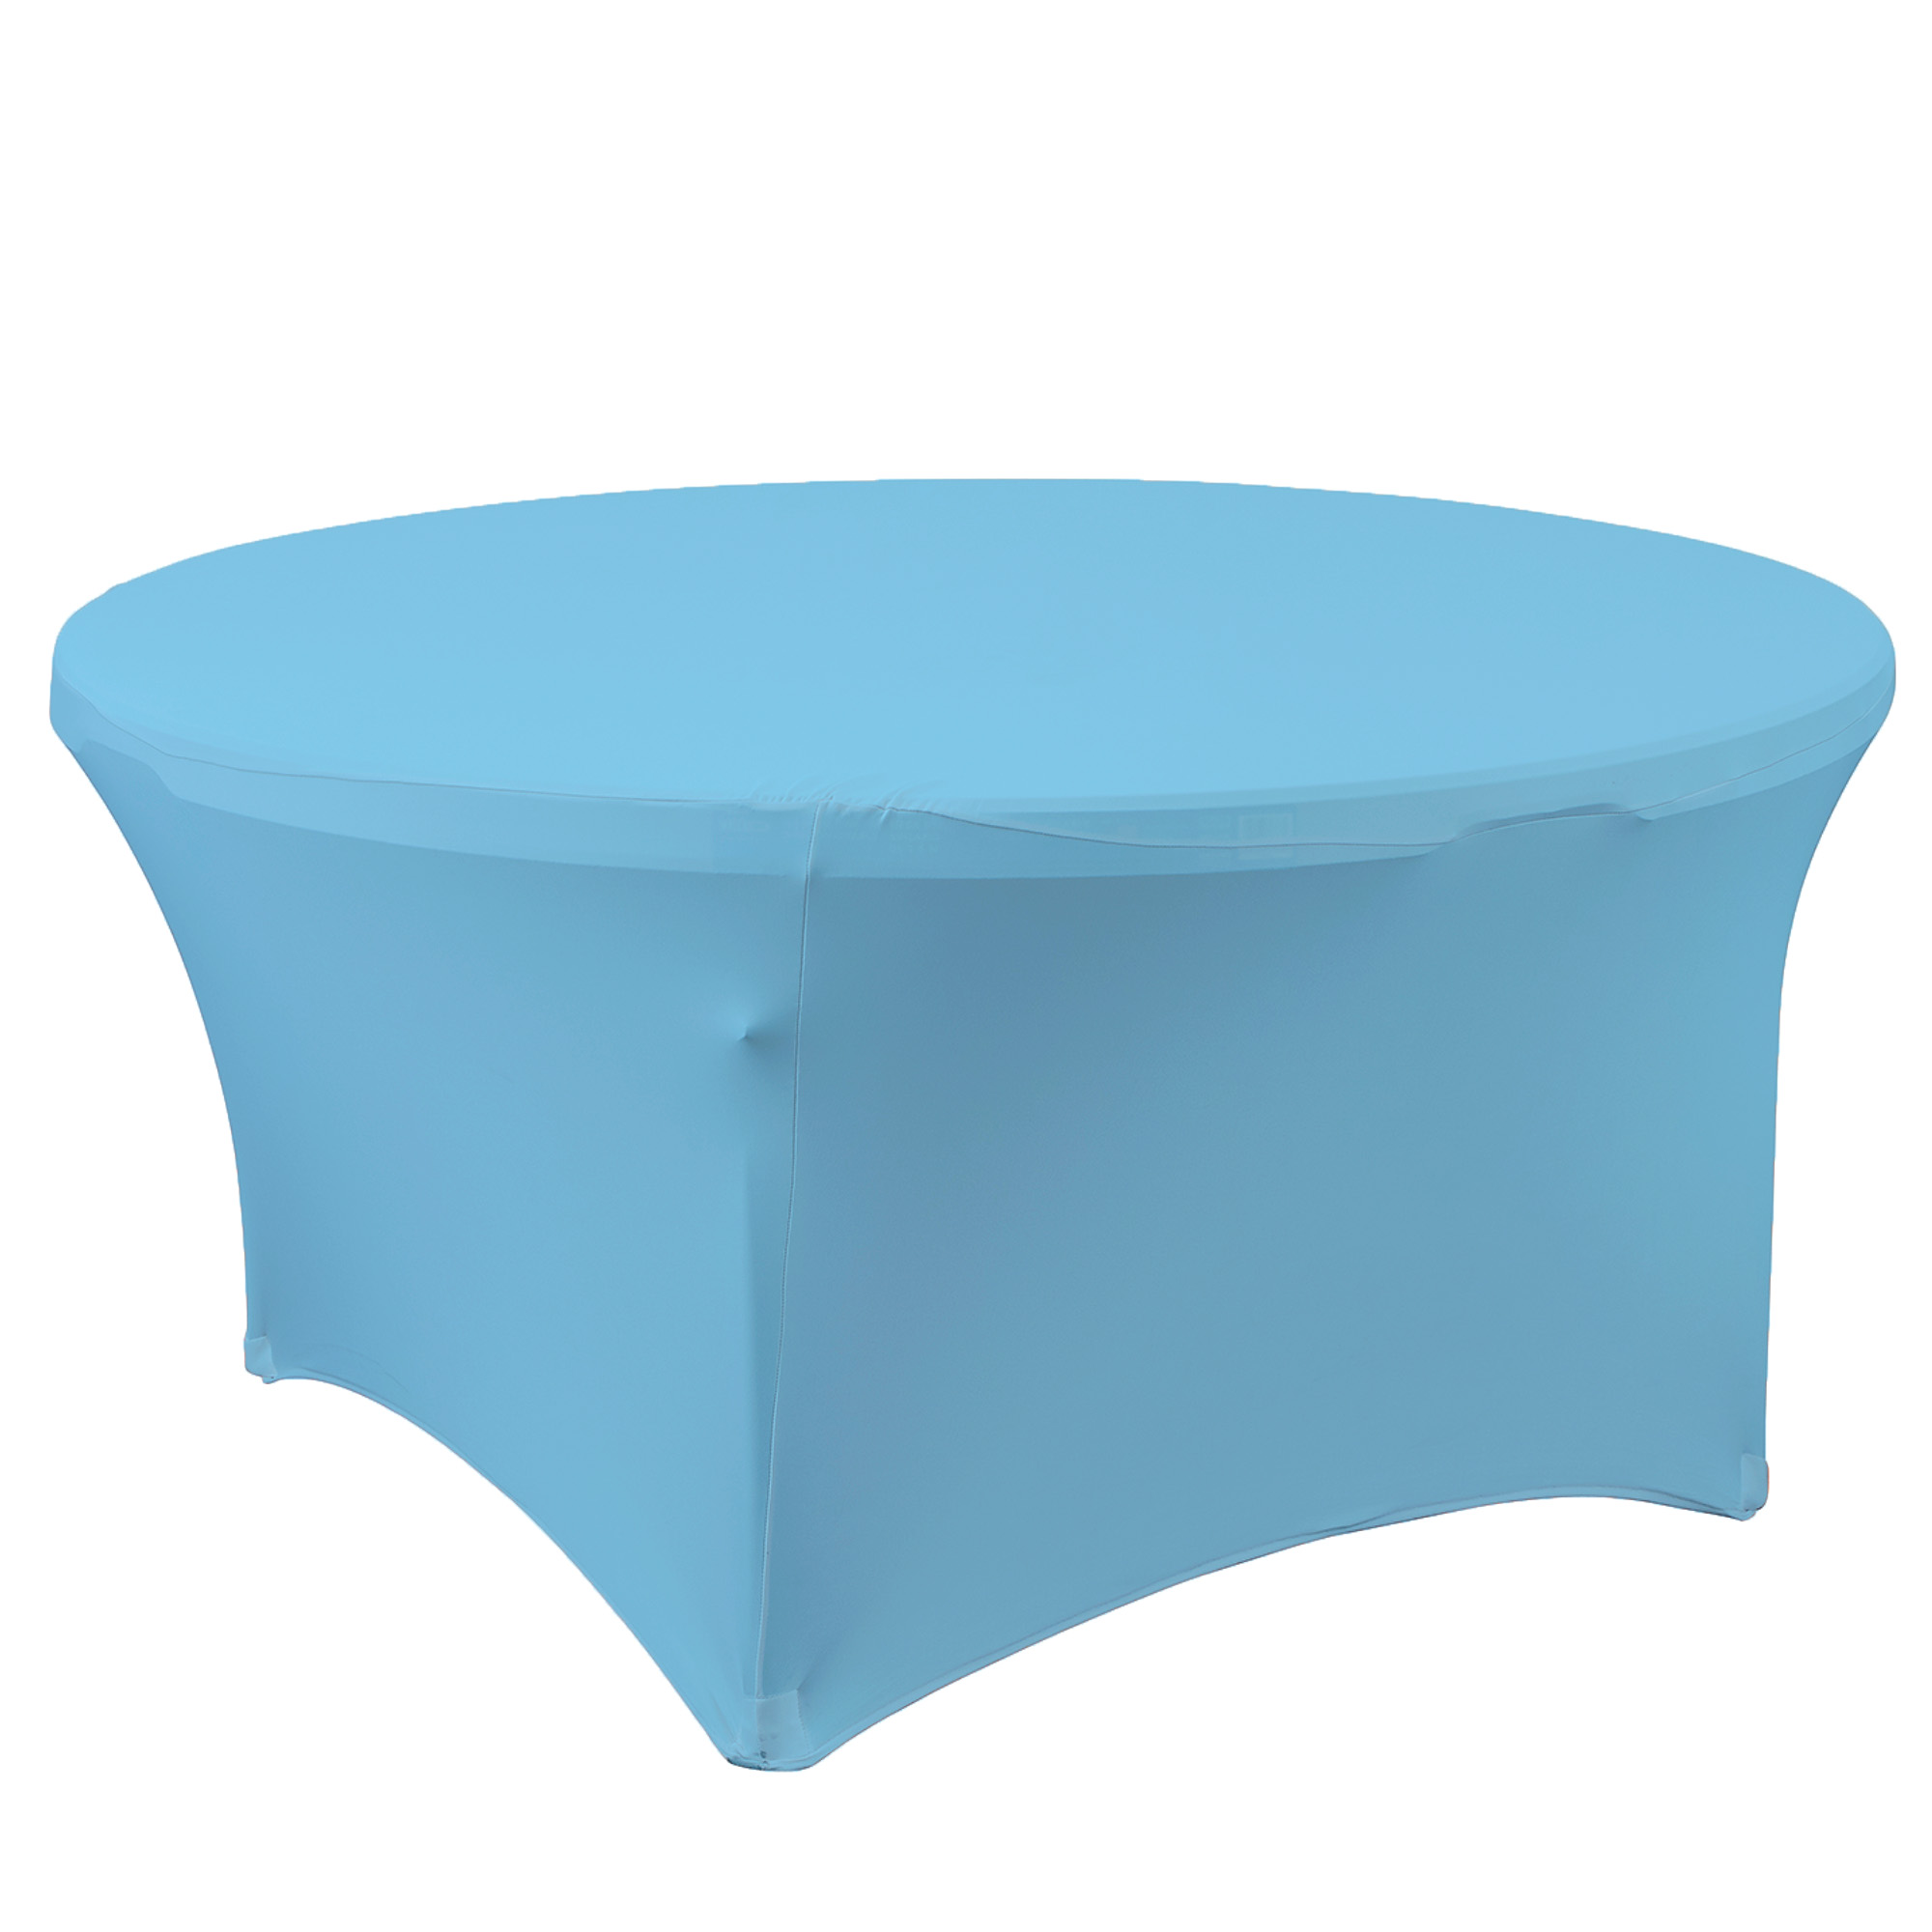 Spandex Round Table Cover 72" - Blue